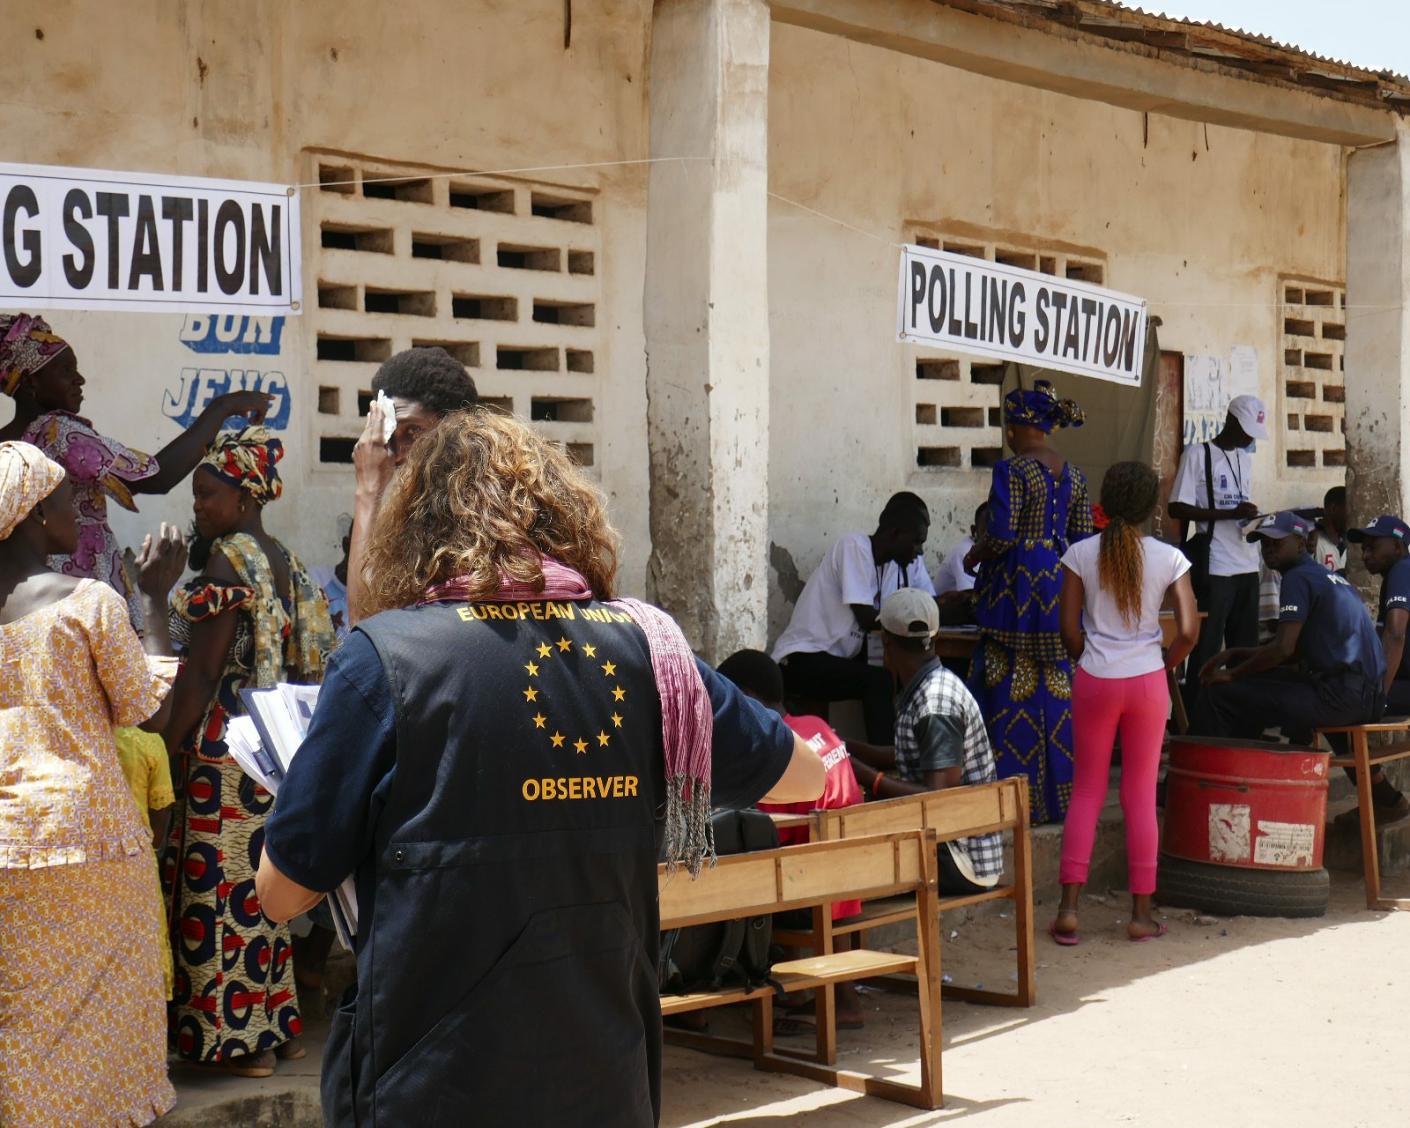 people queuing at a polling station